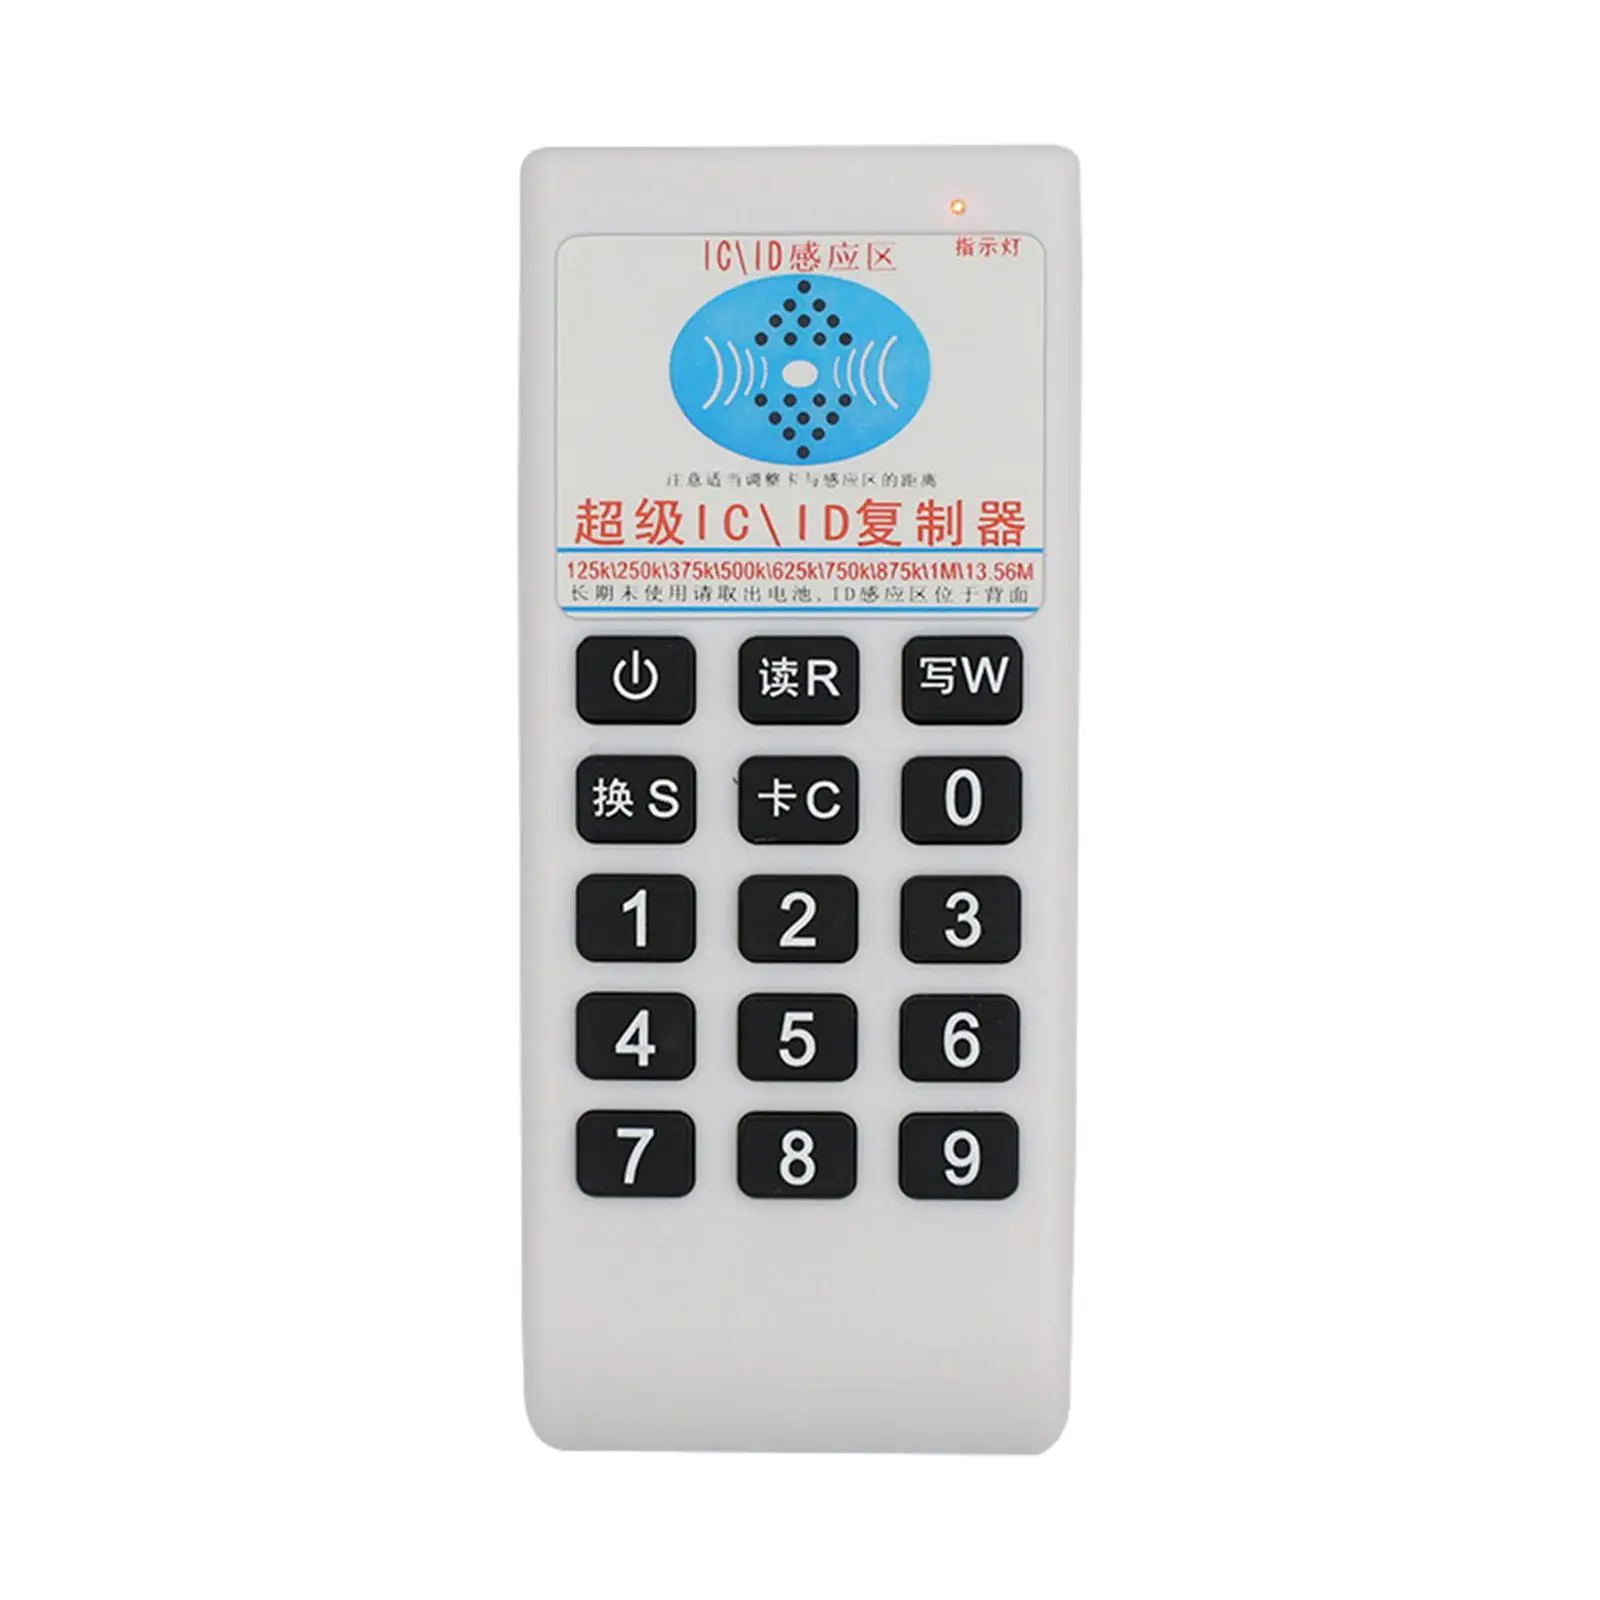 CARDS Reader Writer Voice Broadcast Function for Community School Office Compact Multiple Uses Plug and Play Copier Duplicator